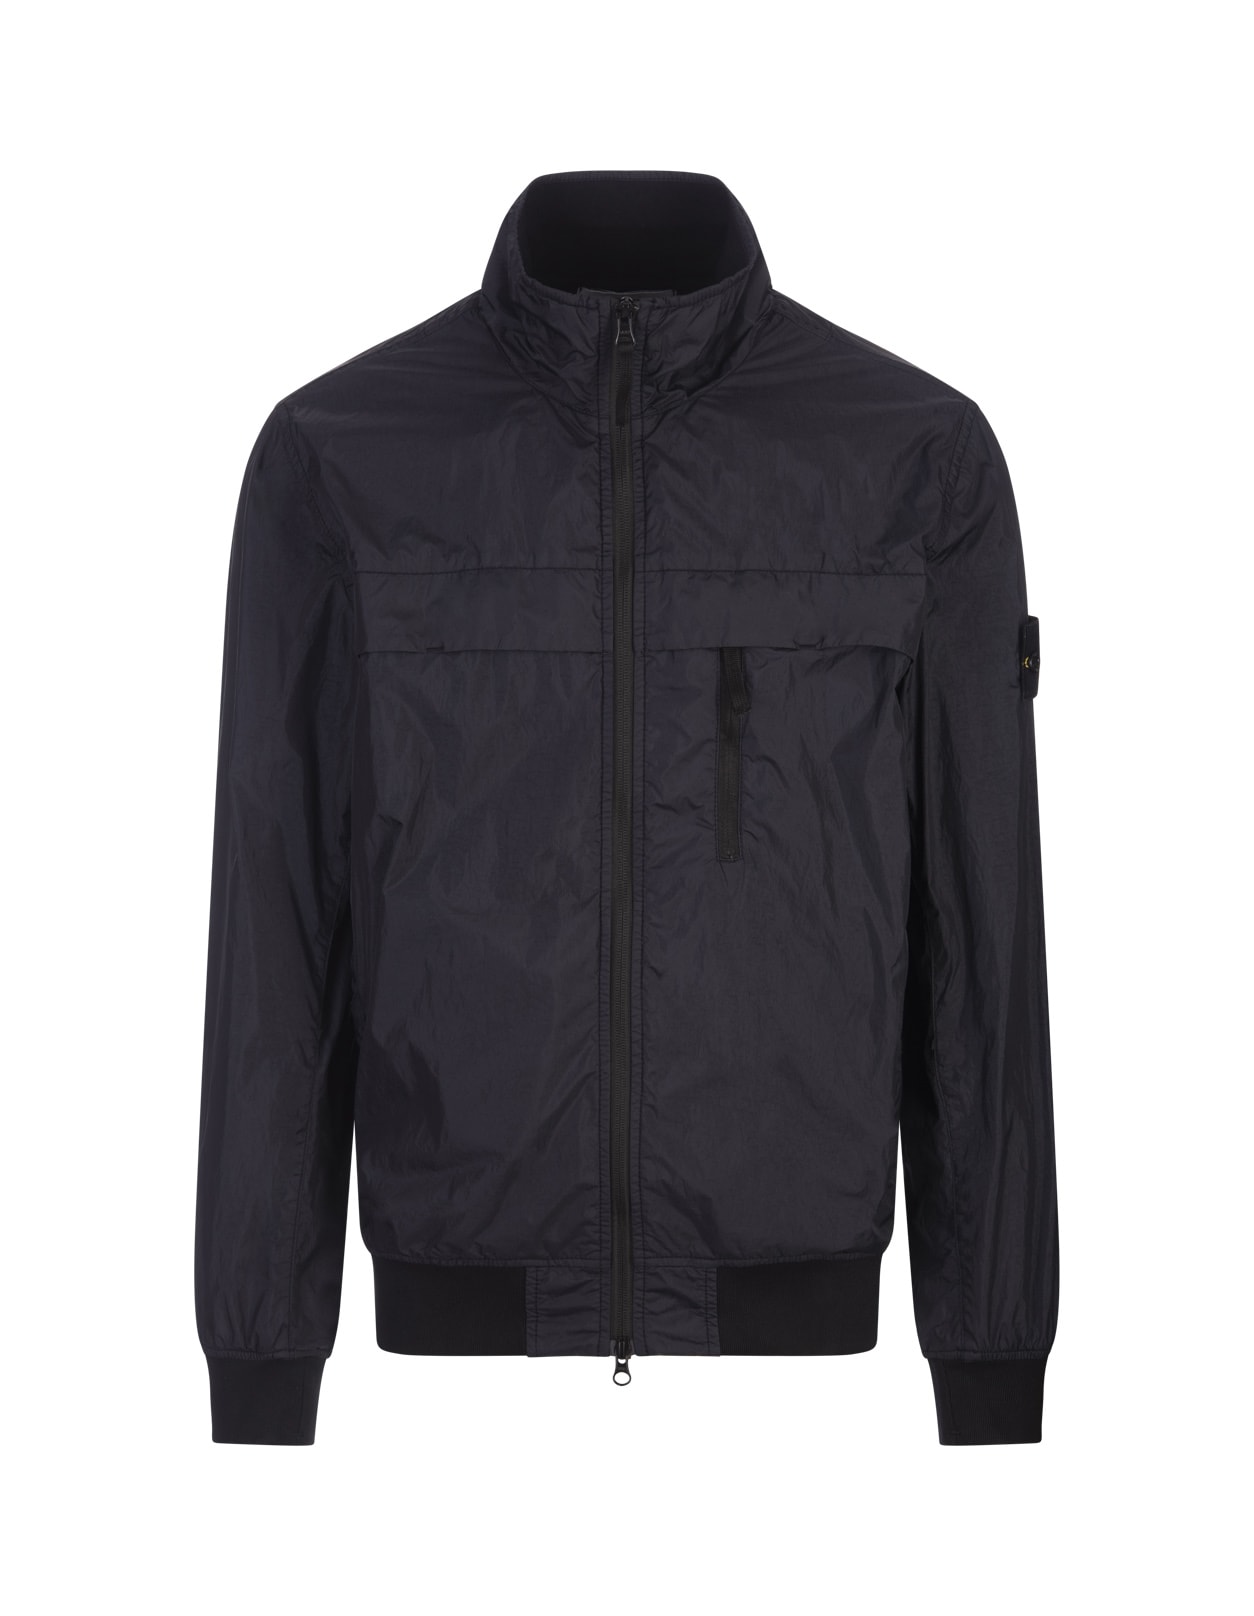 Stone Island Garment Dyed Crinkle Reps R-ny Jacket In Navy Blue